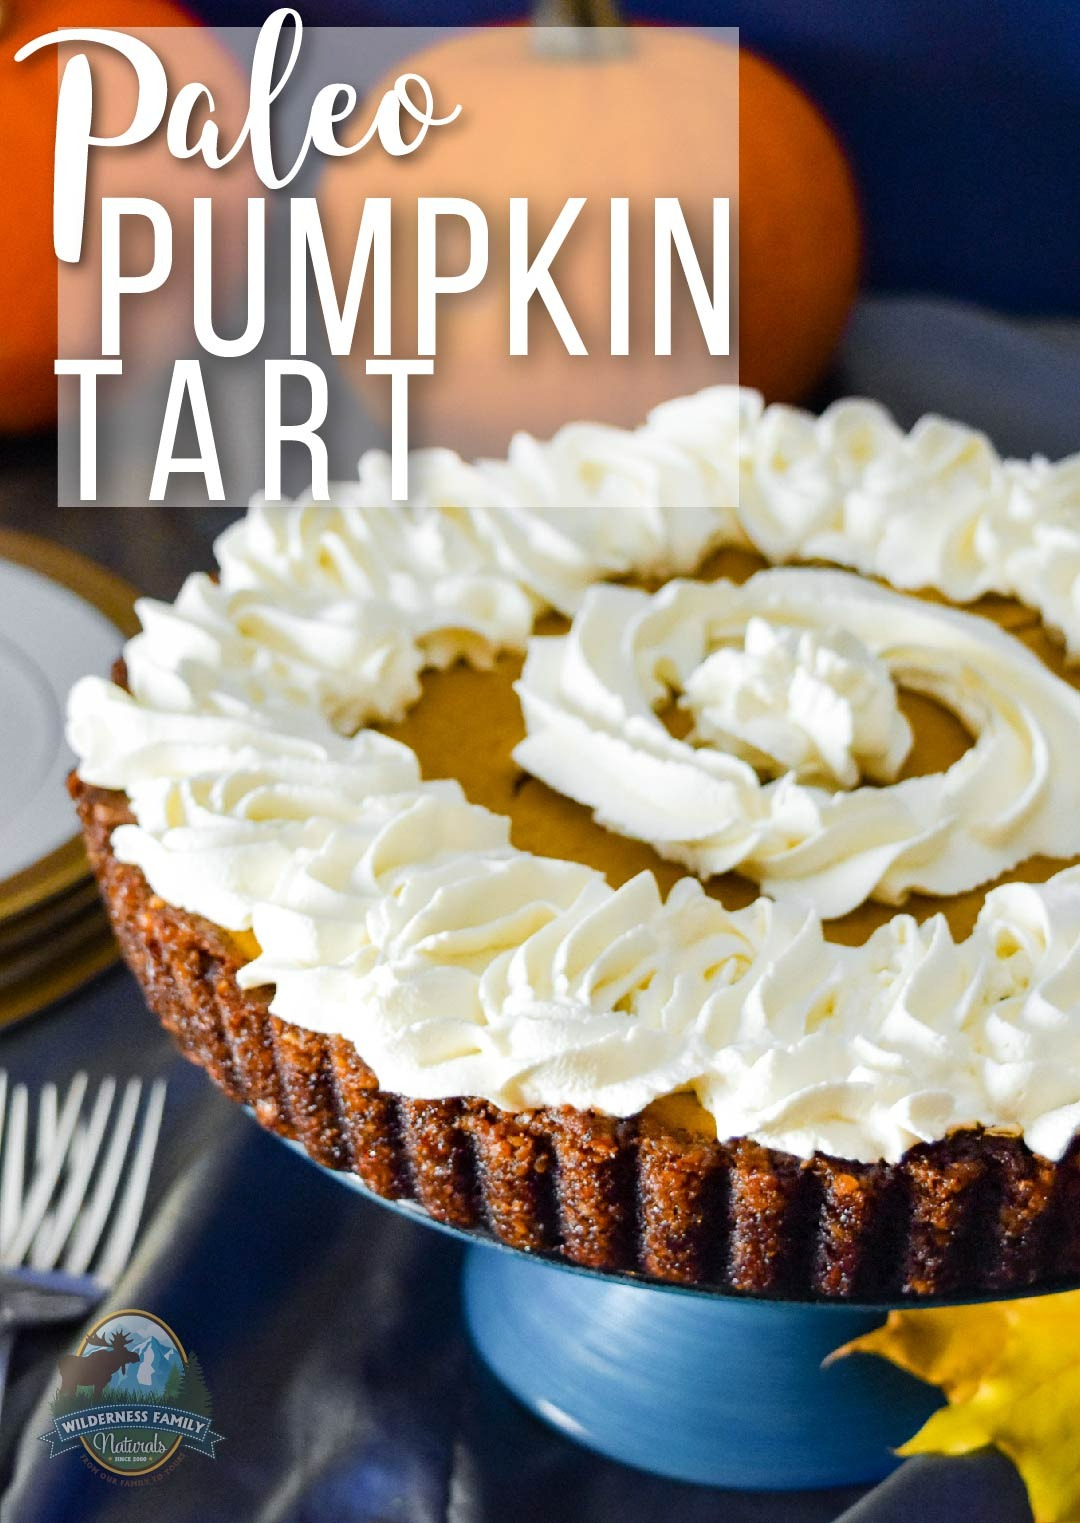 Paleo Pumpkin Tart | Full of holiday spice and cheer, this Paleo Pumpkin Tart tastes so good, no one will notice or care that it's practically health food! Grain-free, gluten-free, and dairy-free, this healthy holiday dessert doesn't lack anything but the bad stuff! | WildernessFamilyNaturals.com